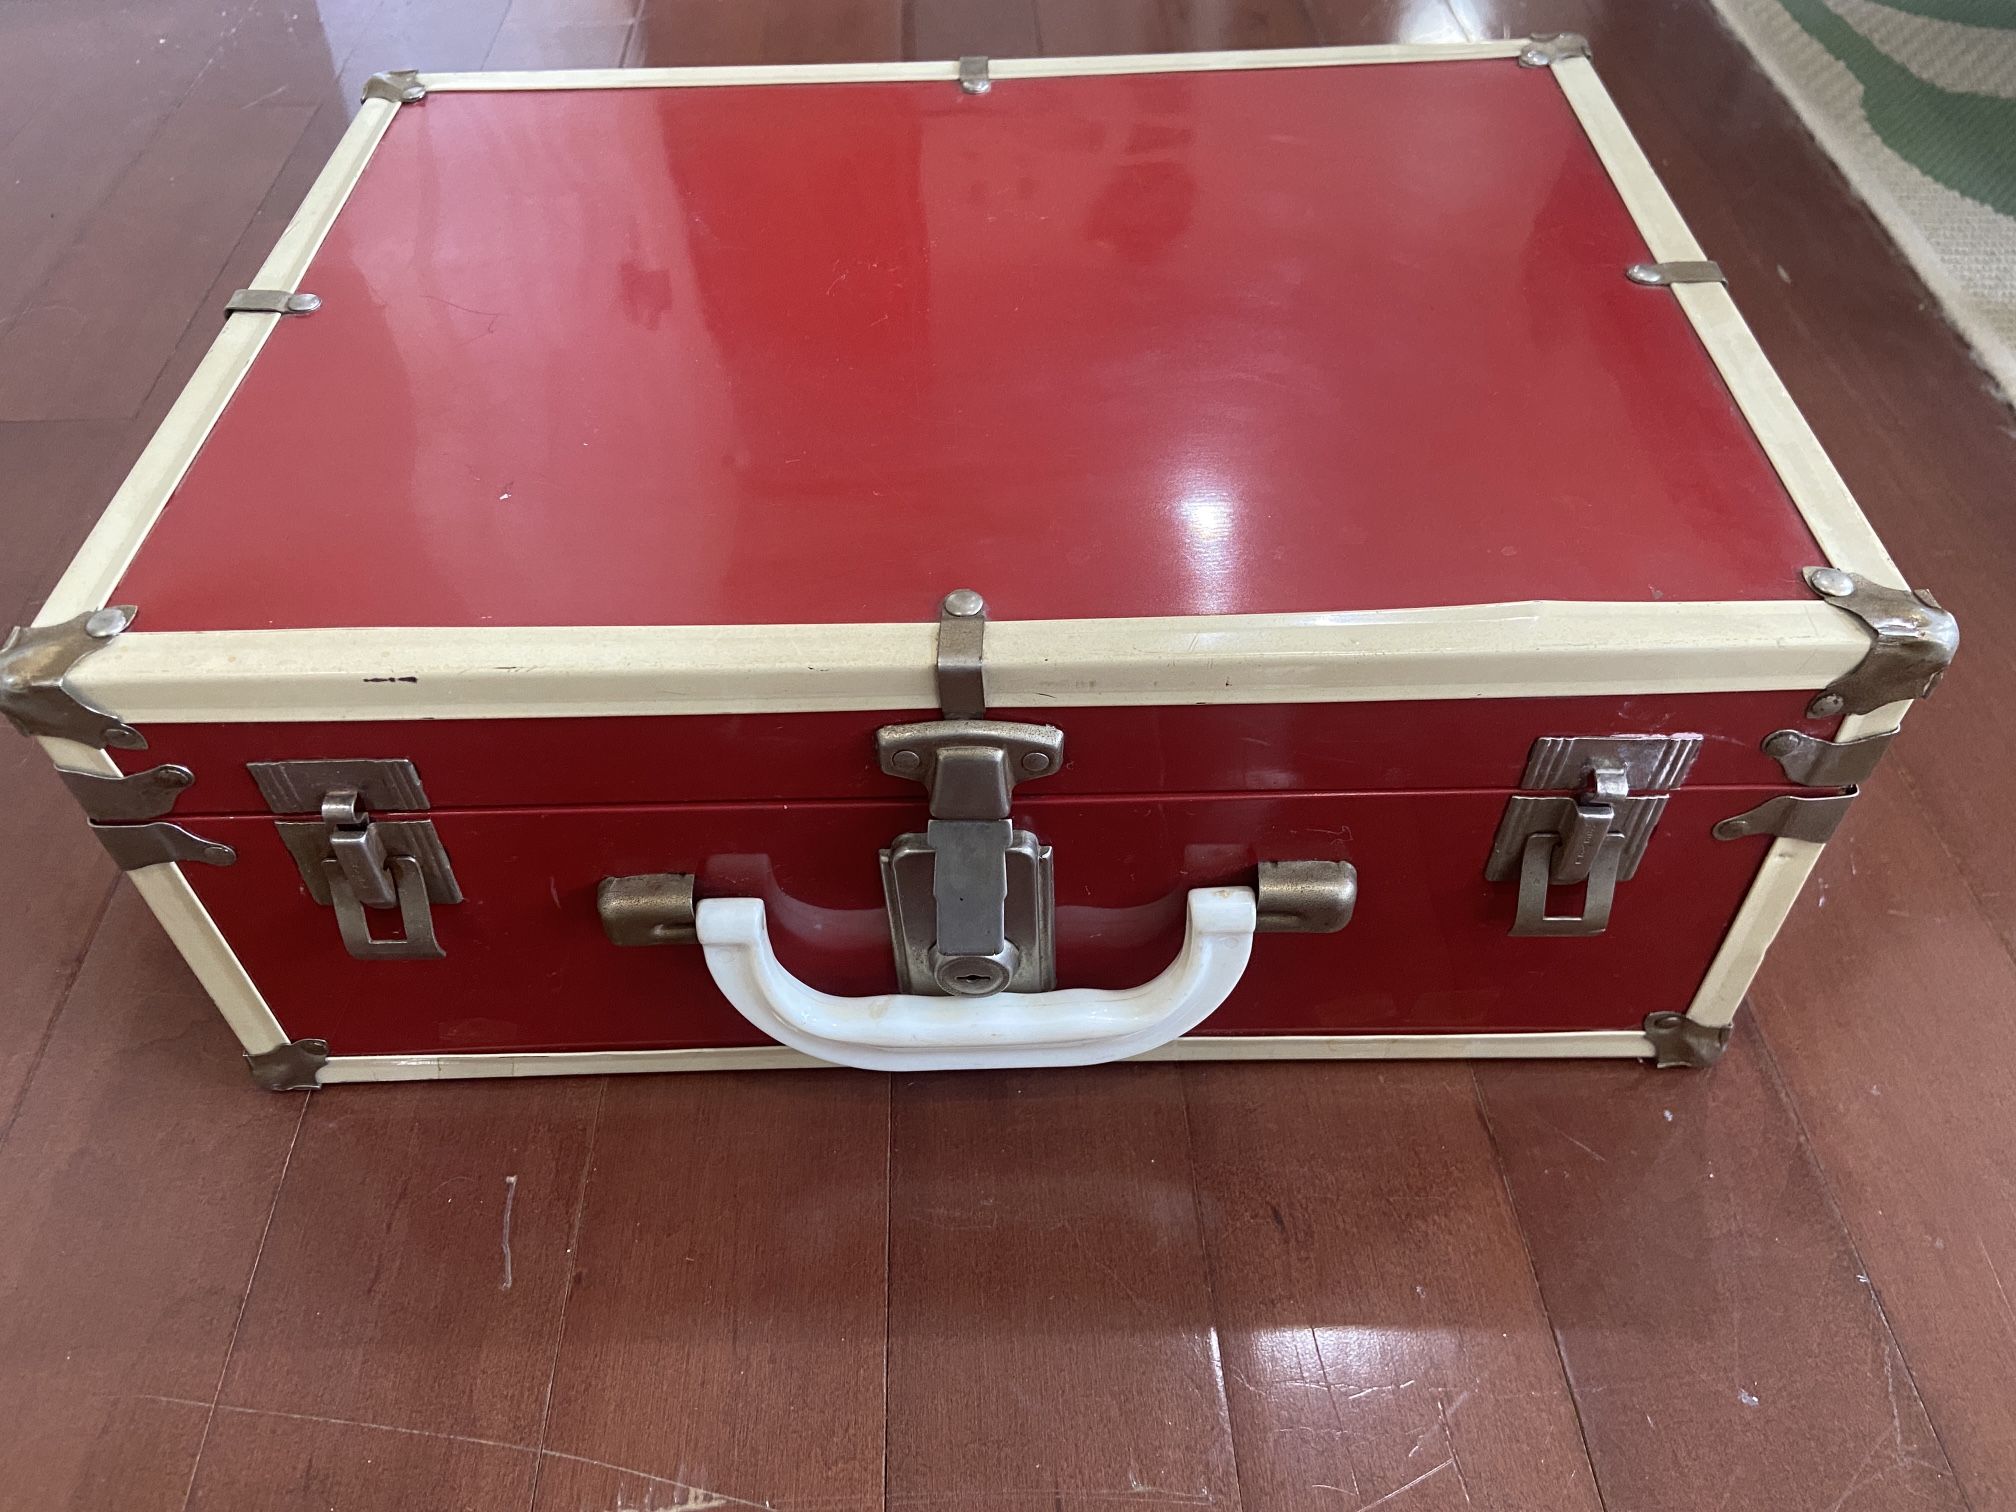 Authentic 1930’s-40’s Neevel Red And White Child’s Doll Or Toy Suitcase 